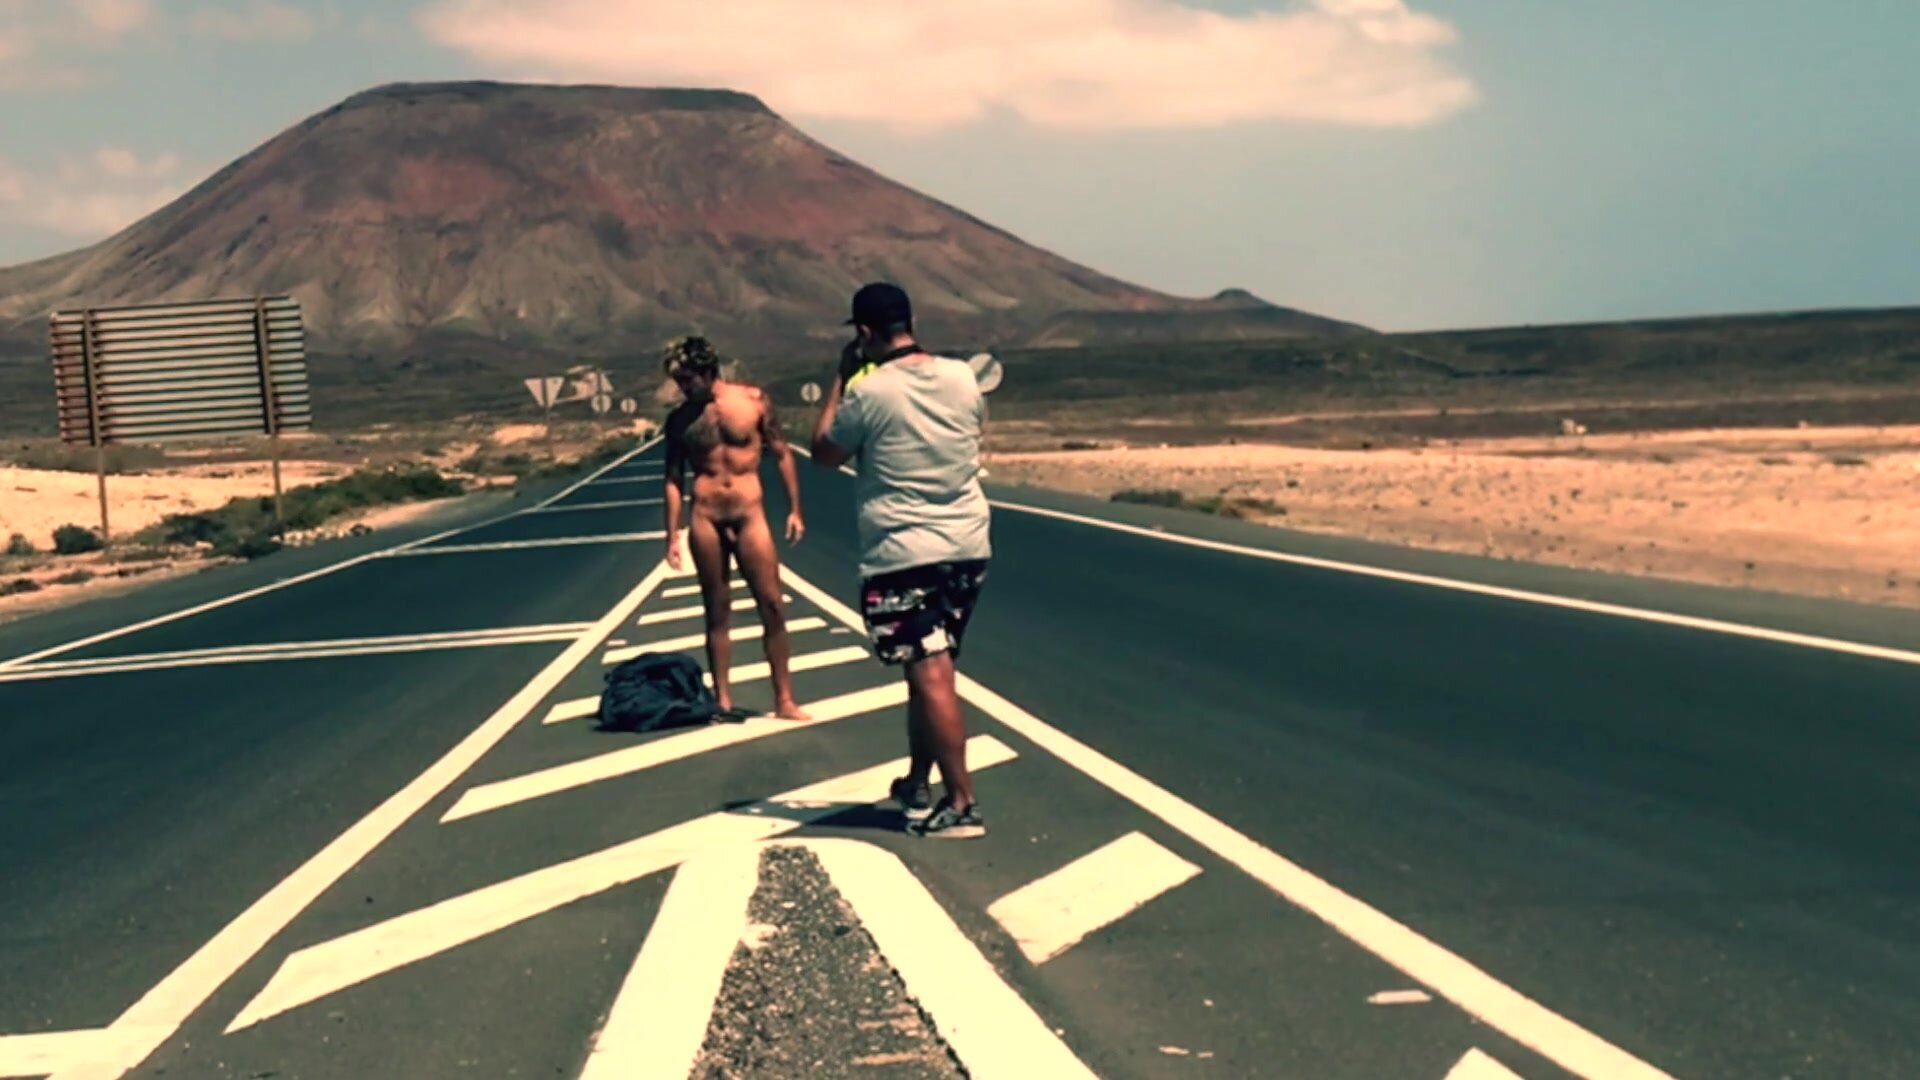 naked photo shoot on the road